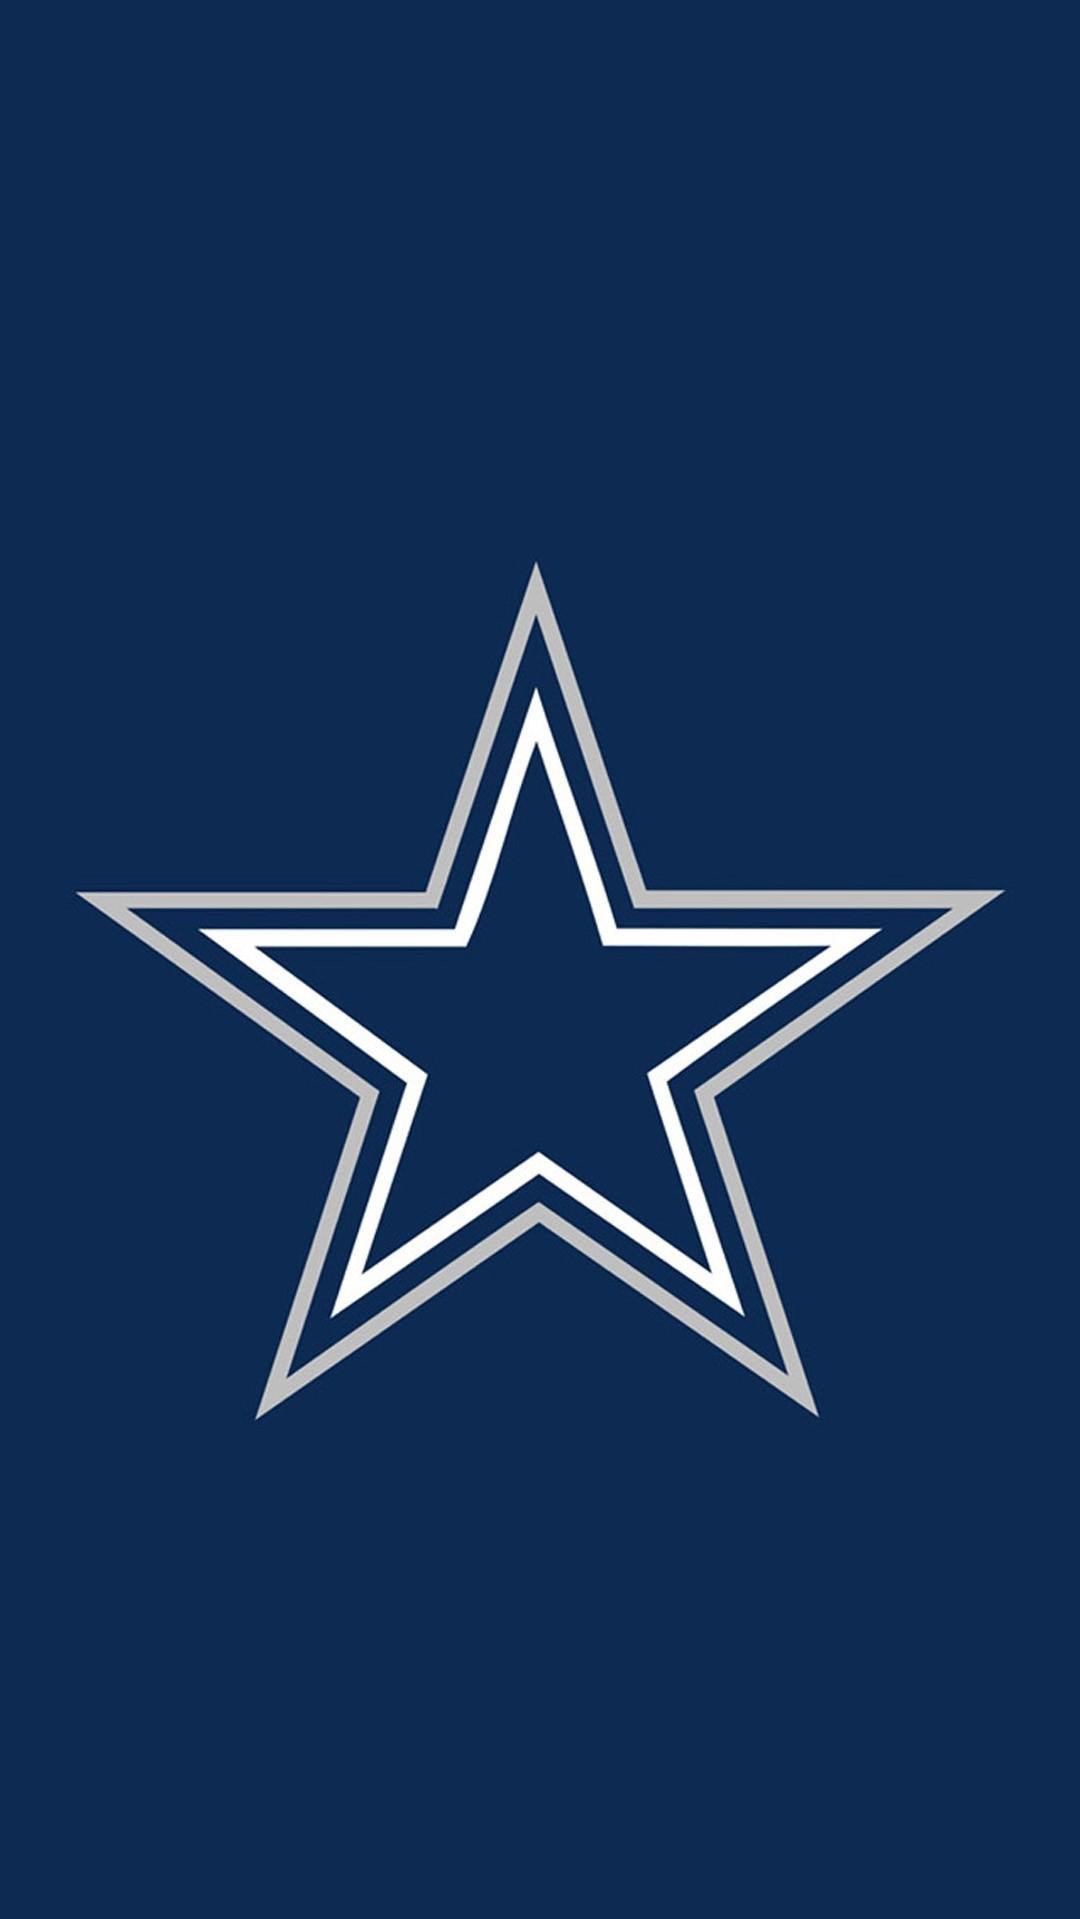 Dallas Cowboys Wallpaper For iPhone Image